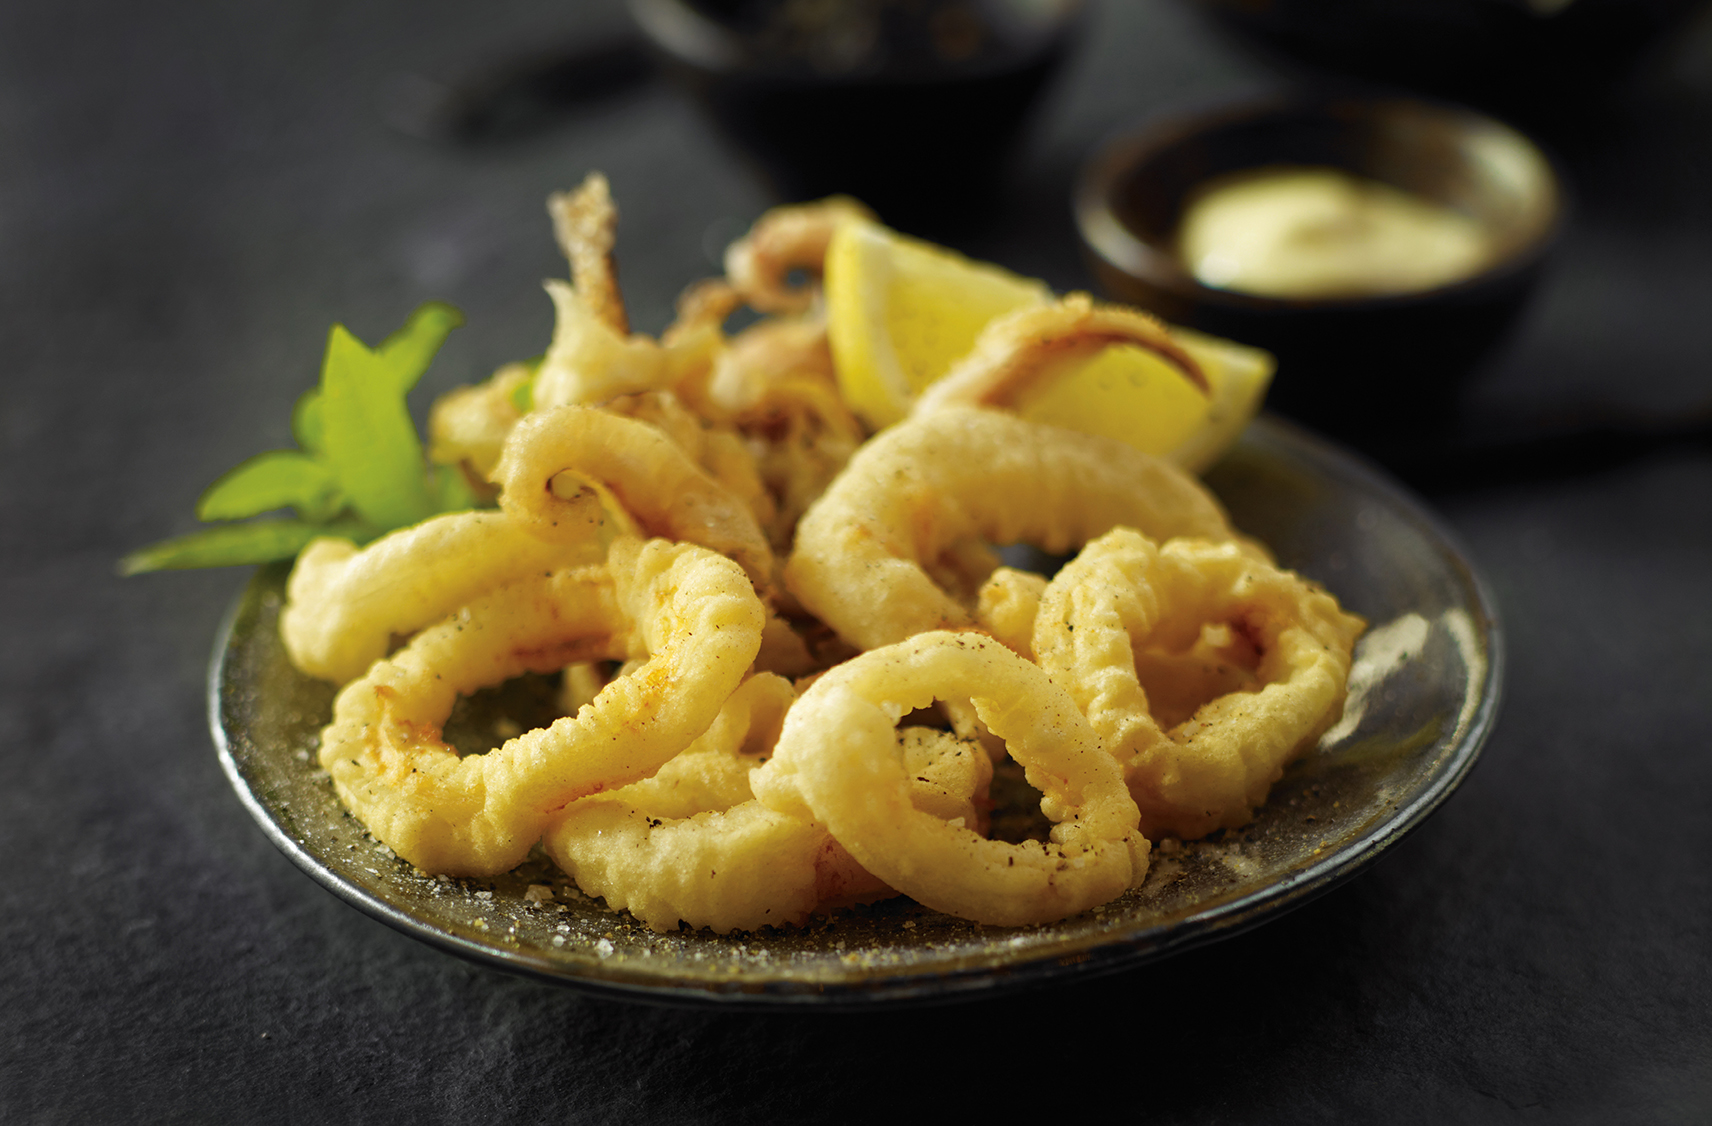 A plate of battered, fried calamari, with a lemon wedge